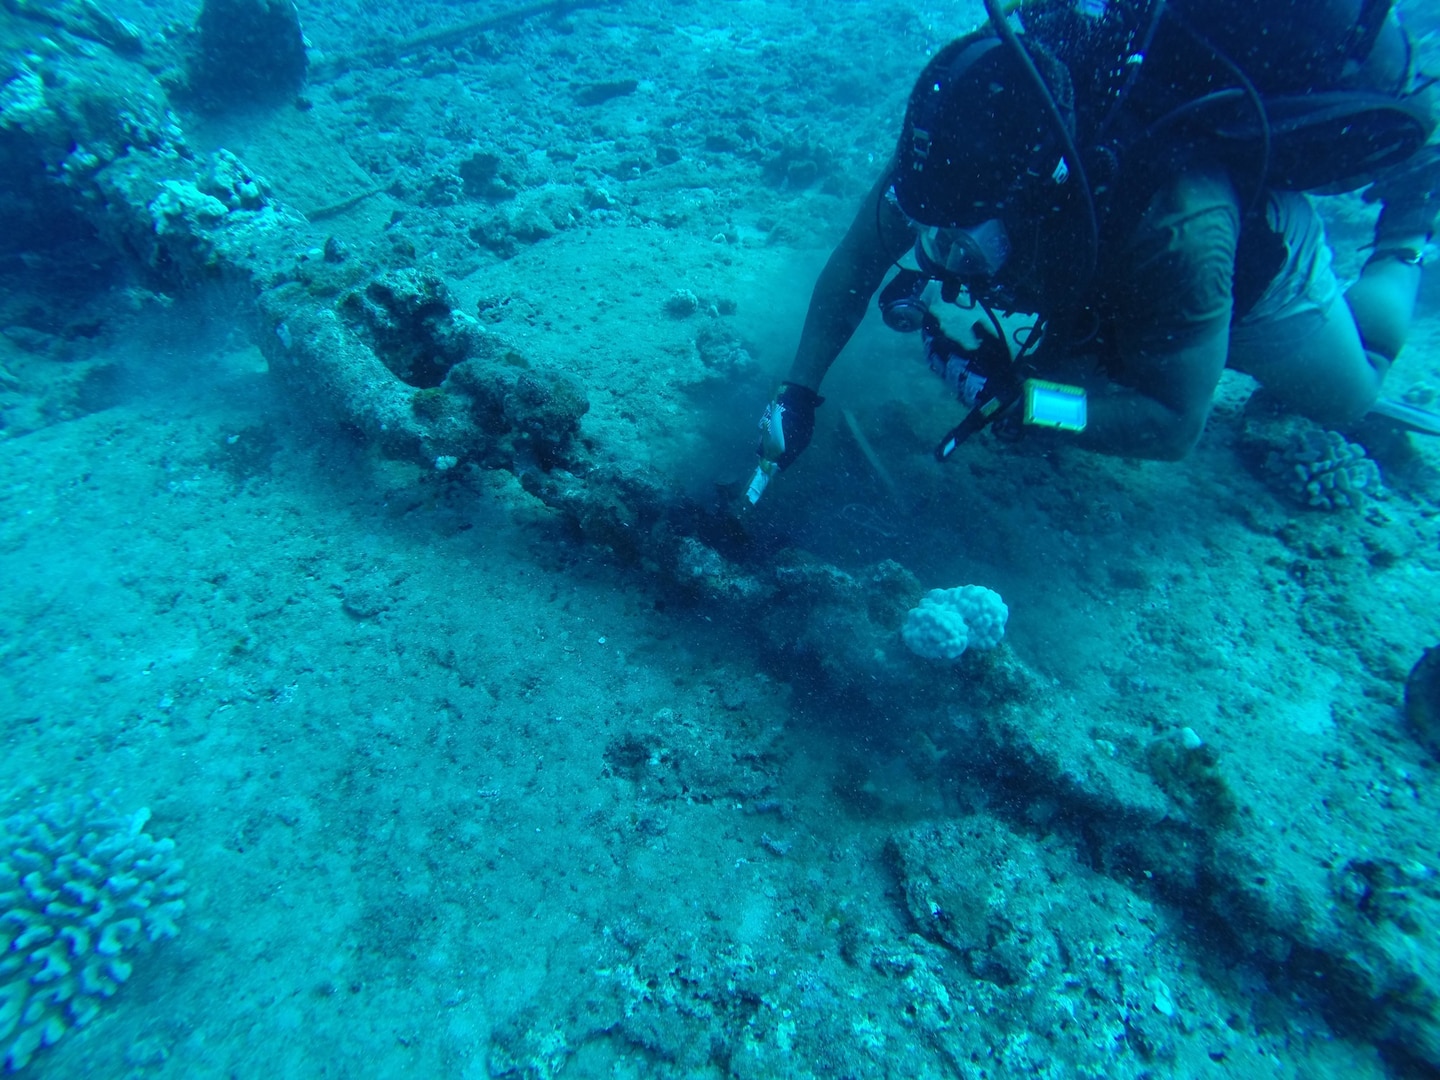 150821-N-ZZ999-001 BARKING SANDS, Hawaii (August 20, 2015) Utilitiesman 2nd Class Eric Martin, assigned to Underwater Construction Team (UCT) 2, verifies a mooring chain and shackle on an anchor point that will be used during cable splicing operations to allow a cable ship to anchor at a specific location. UCT 2's Construction Dive Detachment Charlie (CDDC) is performing subsea cable maintenance at the Pacific Missile Range Facility. CDDC Is on the first stop of their deployment, where they are conducting inspection, maintenance and repair of various underwater and waterfront facilities in support of the Pacific Fleet. (U.S. Navy photo by Builder 2nd Class Dave Madmon/Released)